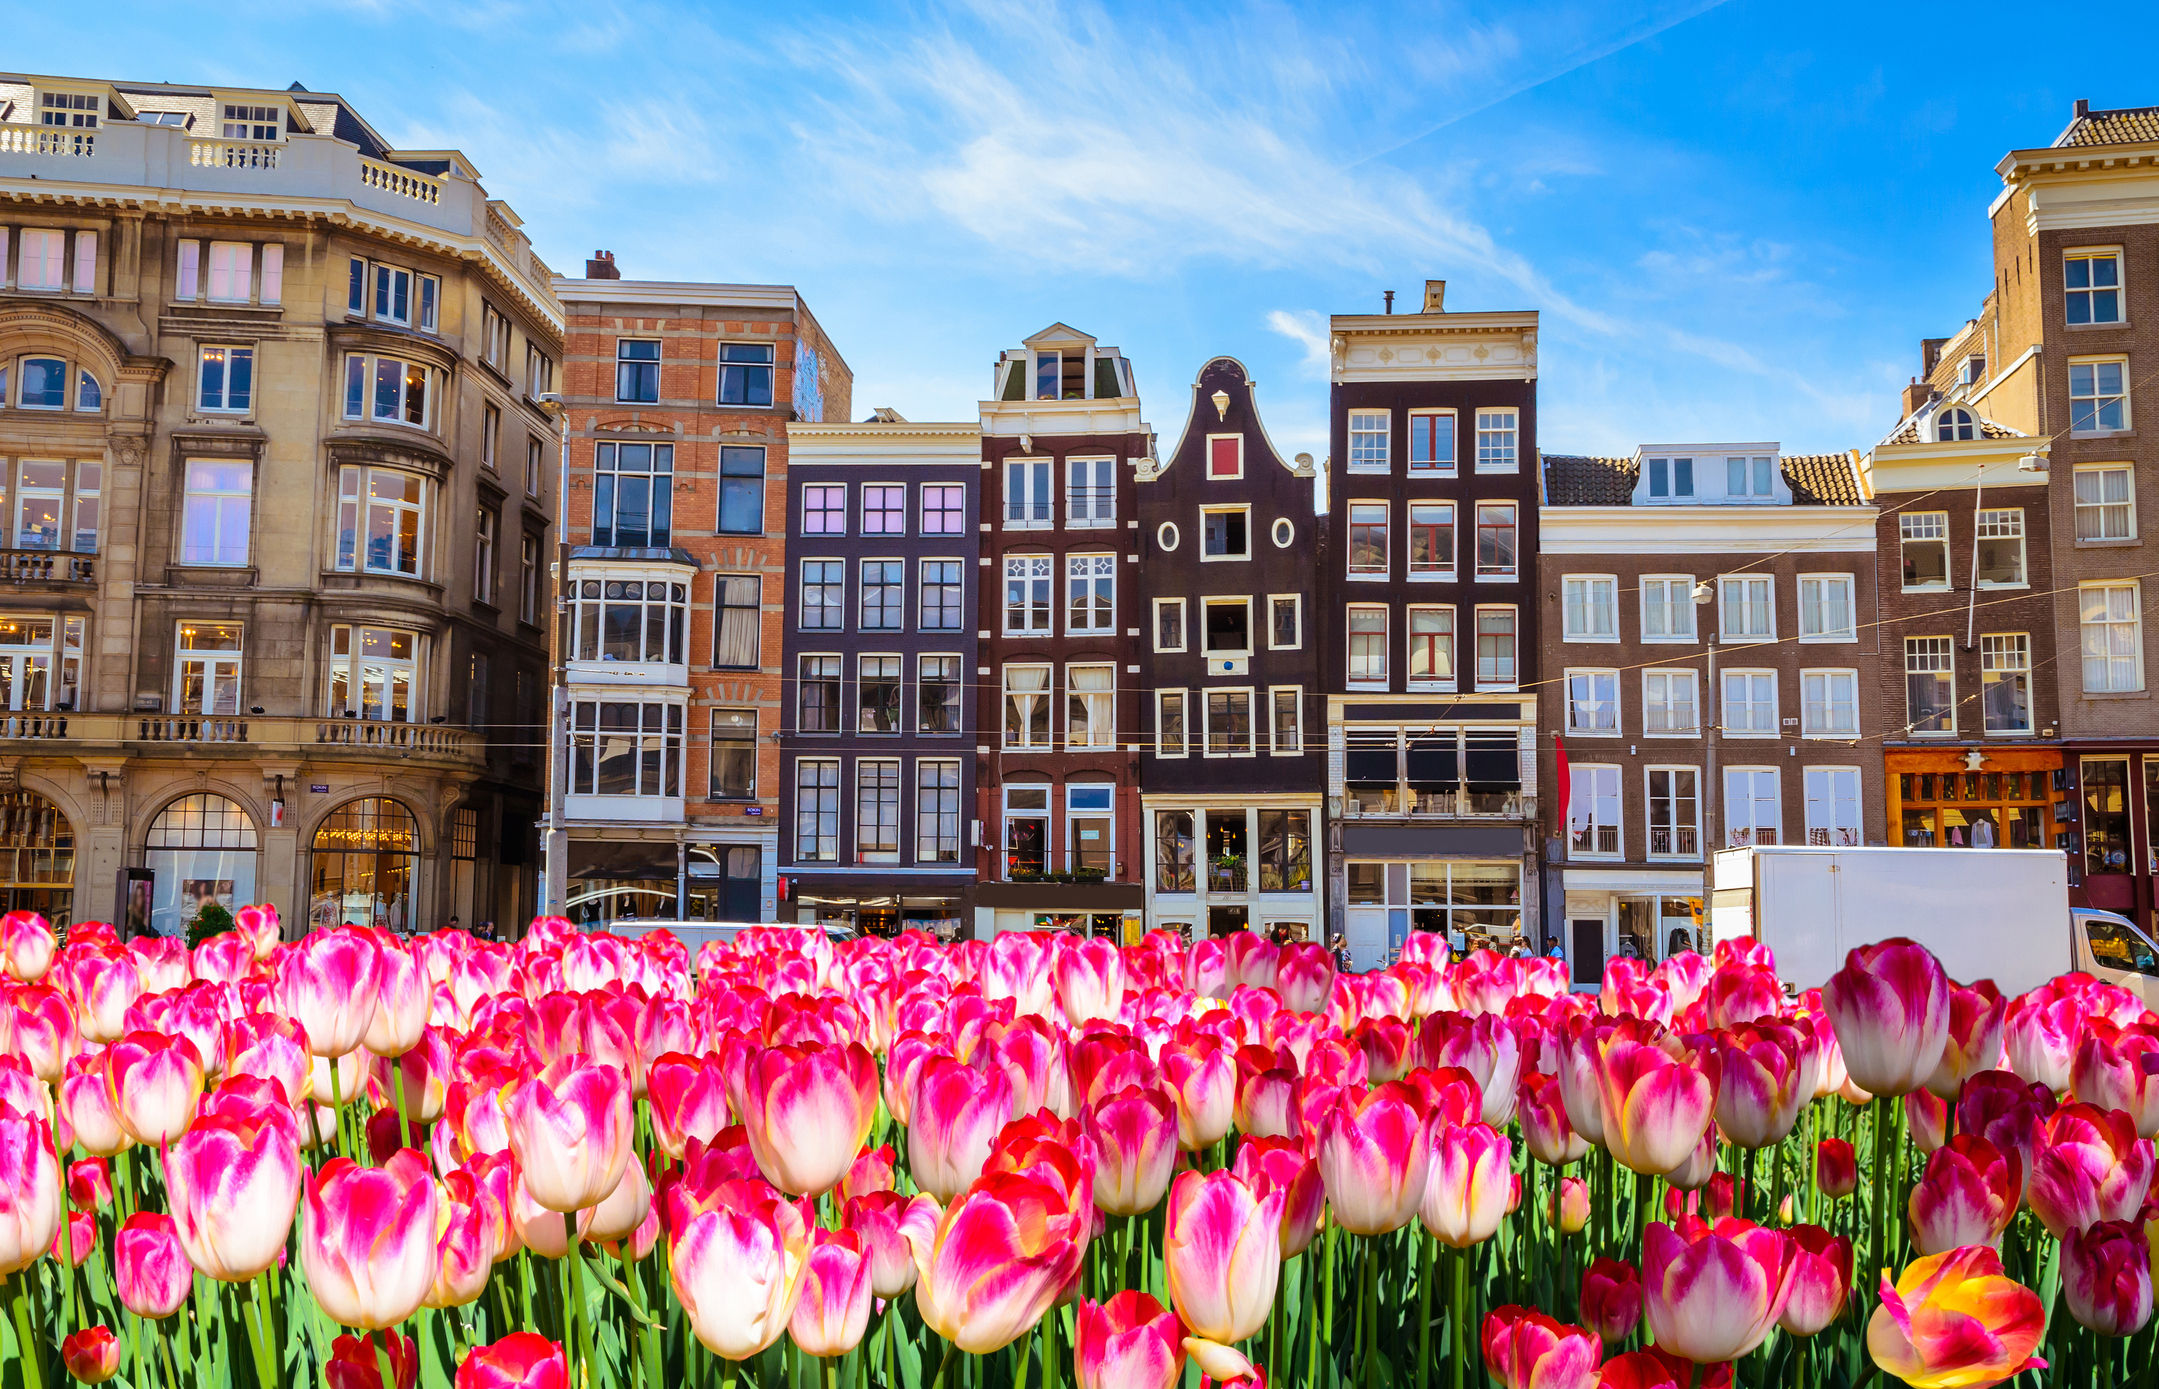 The most picturesque destinations to visit this spring